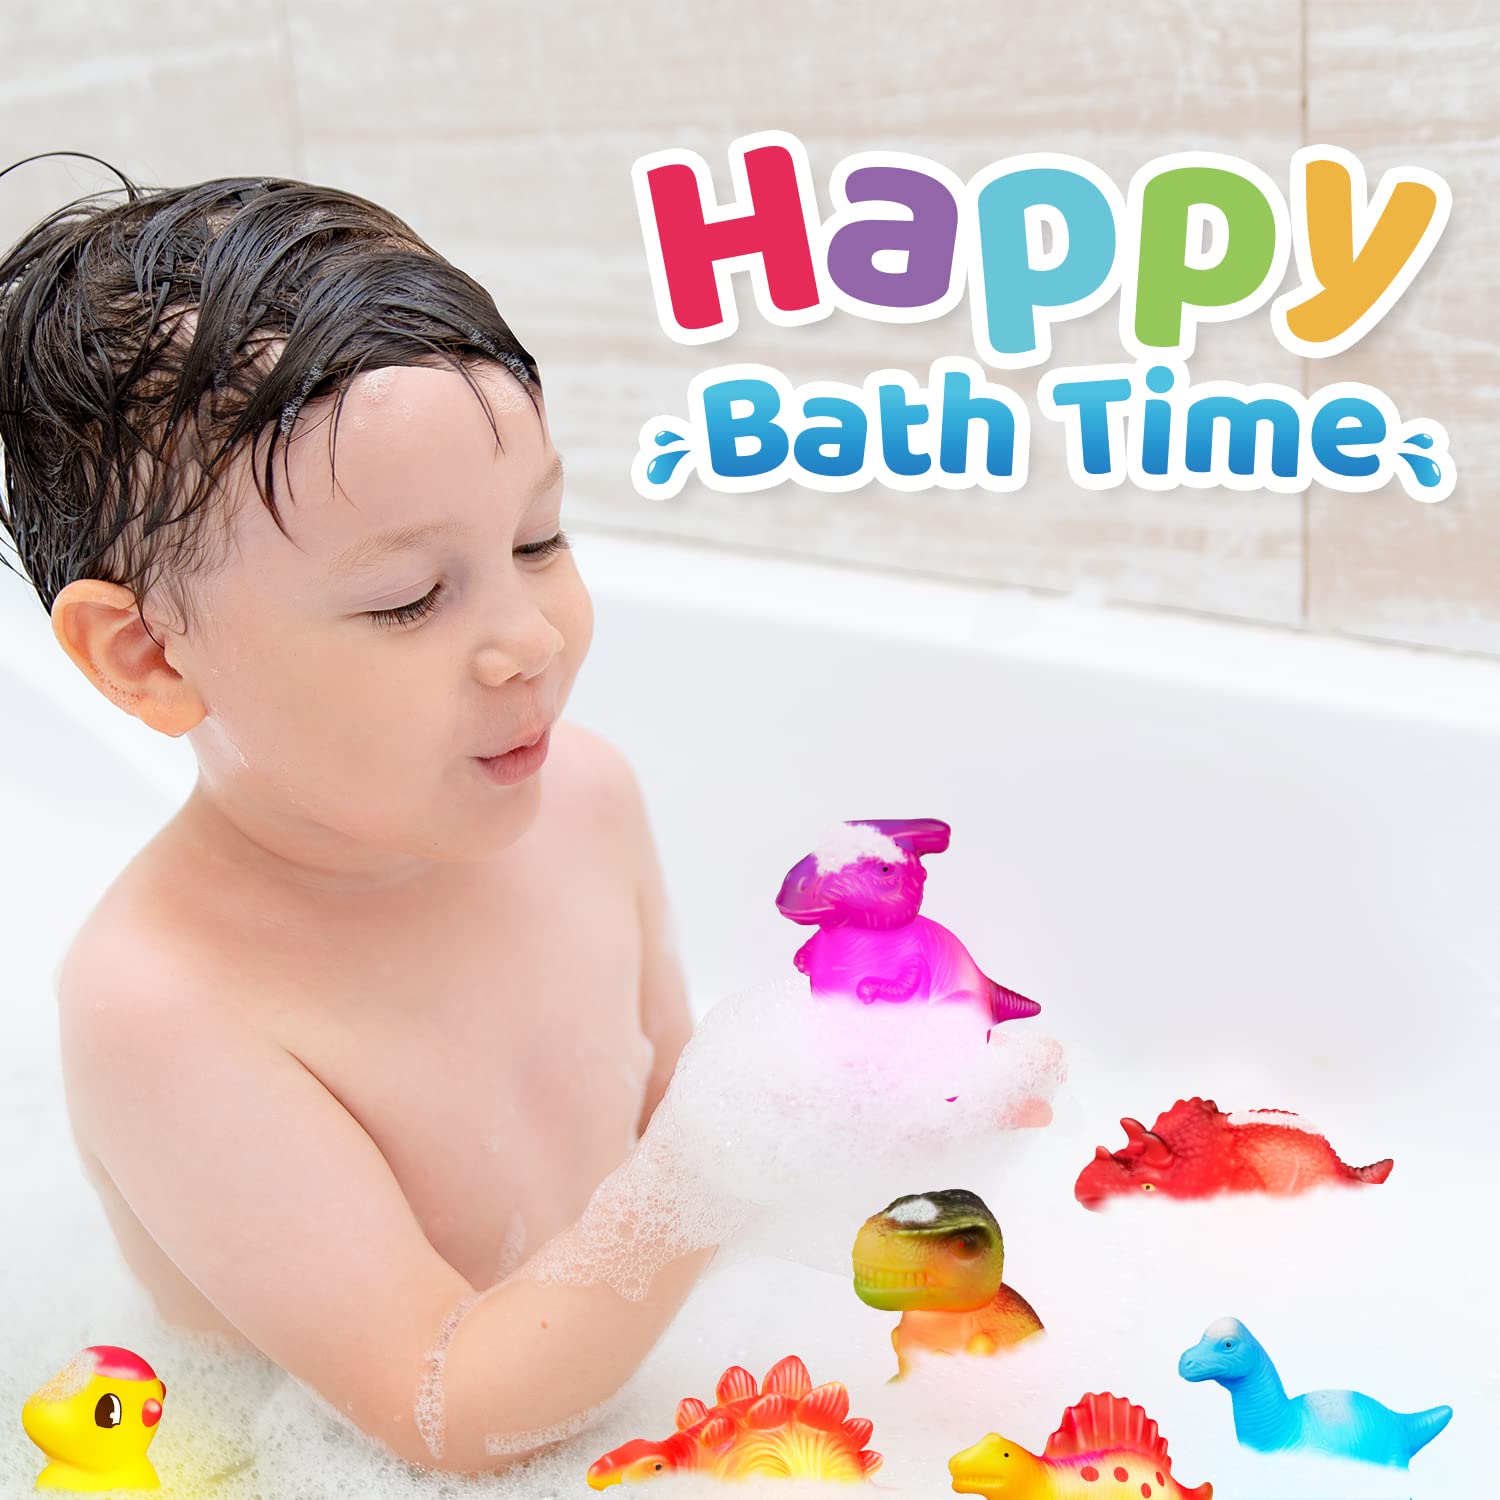 8 Pcs Light Up Bath Toys, Baby Bathtub Toys for 3 4 5 Year Old Boy Girls Gifts, Rubber Duck Dinosaur Shark for Toddlers, Floating Flashing Color Changing Light Sensory Pool Toys